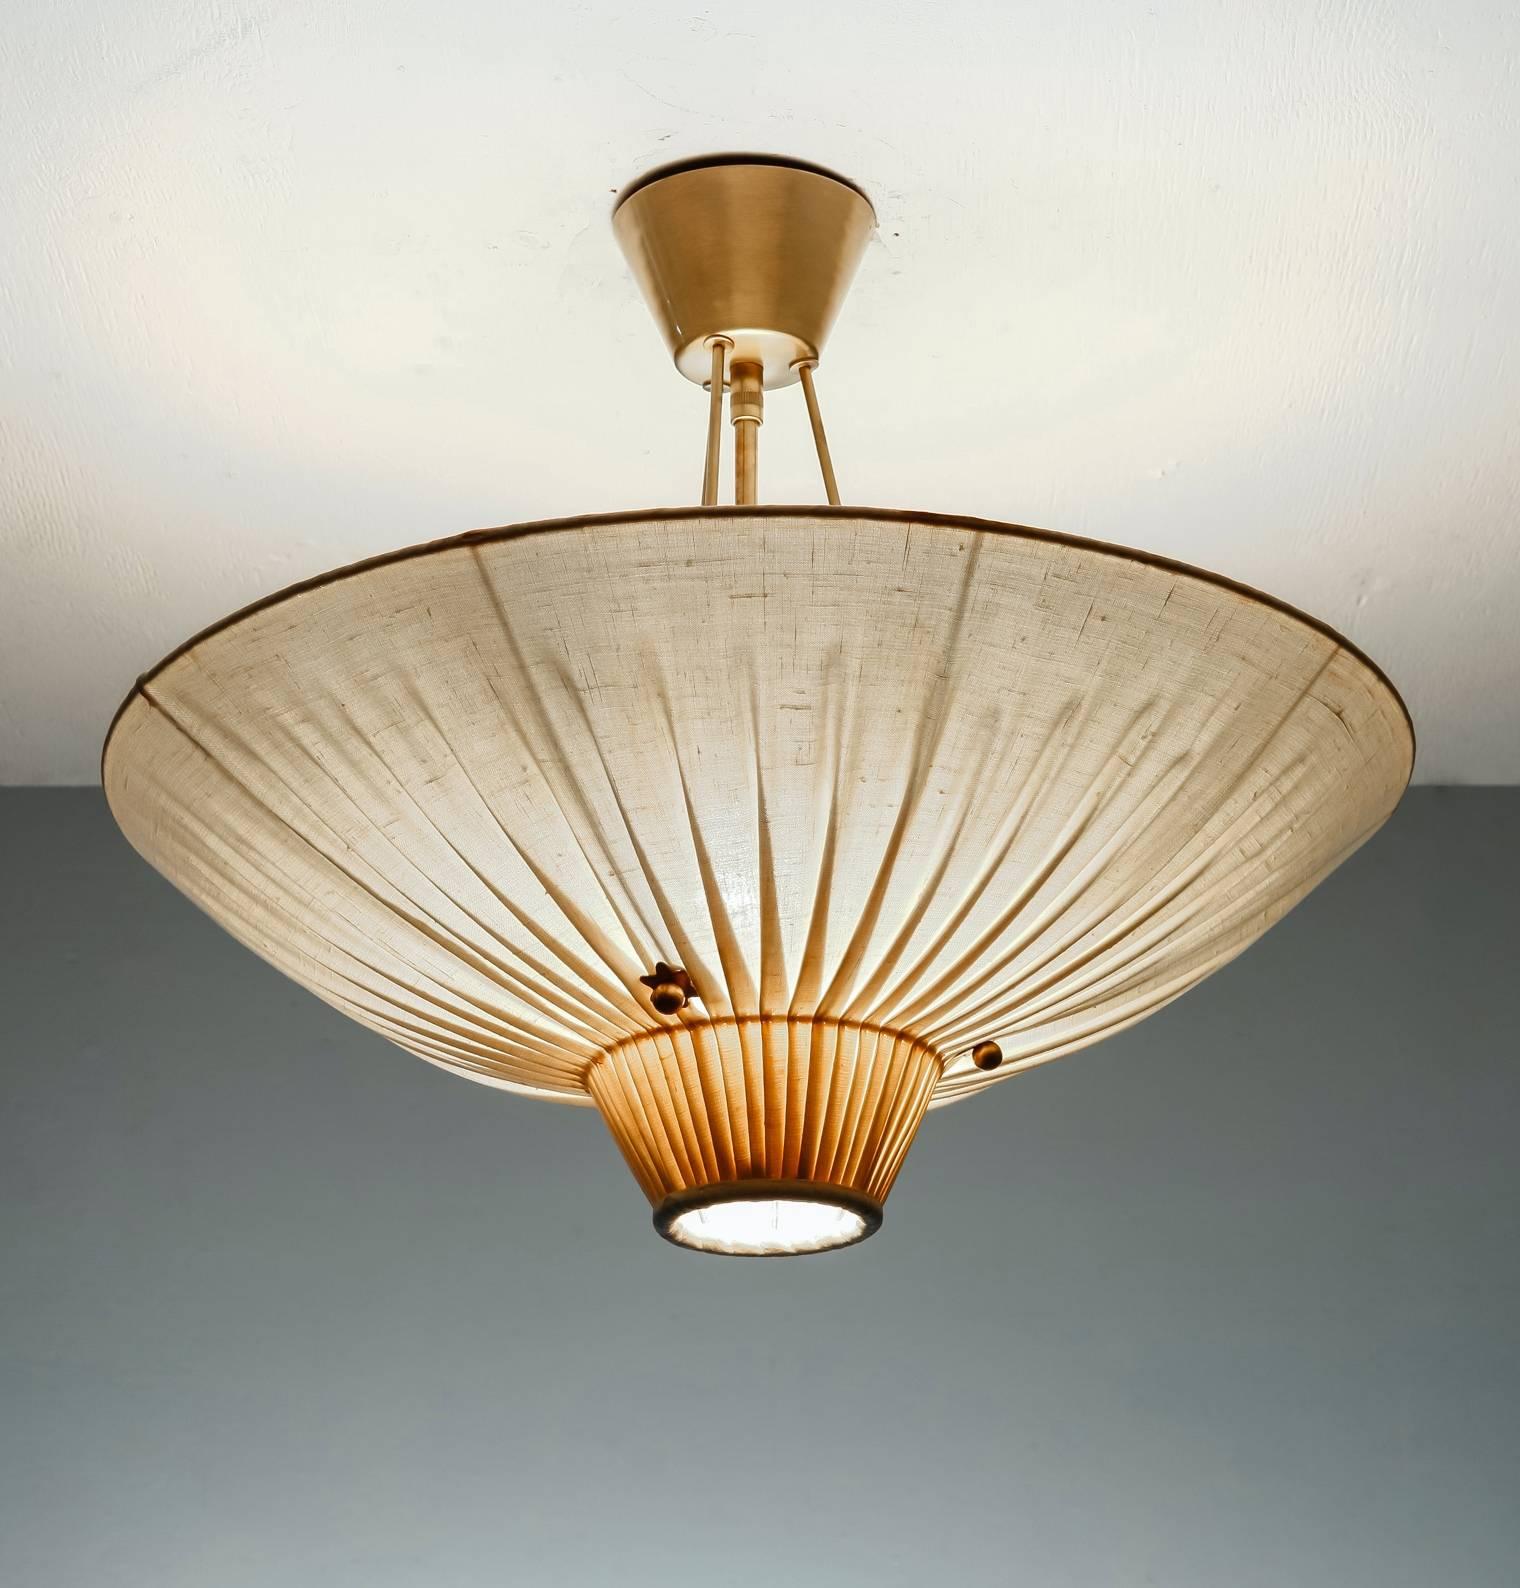 A 1940s pendant by Hans Bergström for Ateljé Lyktan. The lamp is made of a brass ceiling mount and a pleated off-white silk shade, which is fixed with three brass flower-like elements. The silk shade creates a stunning light distribution.
Labeled